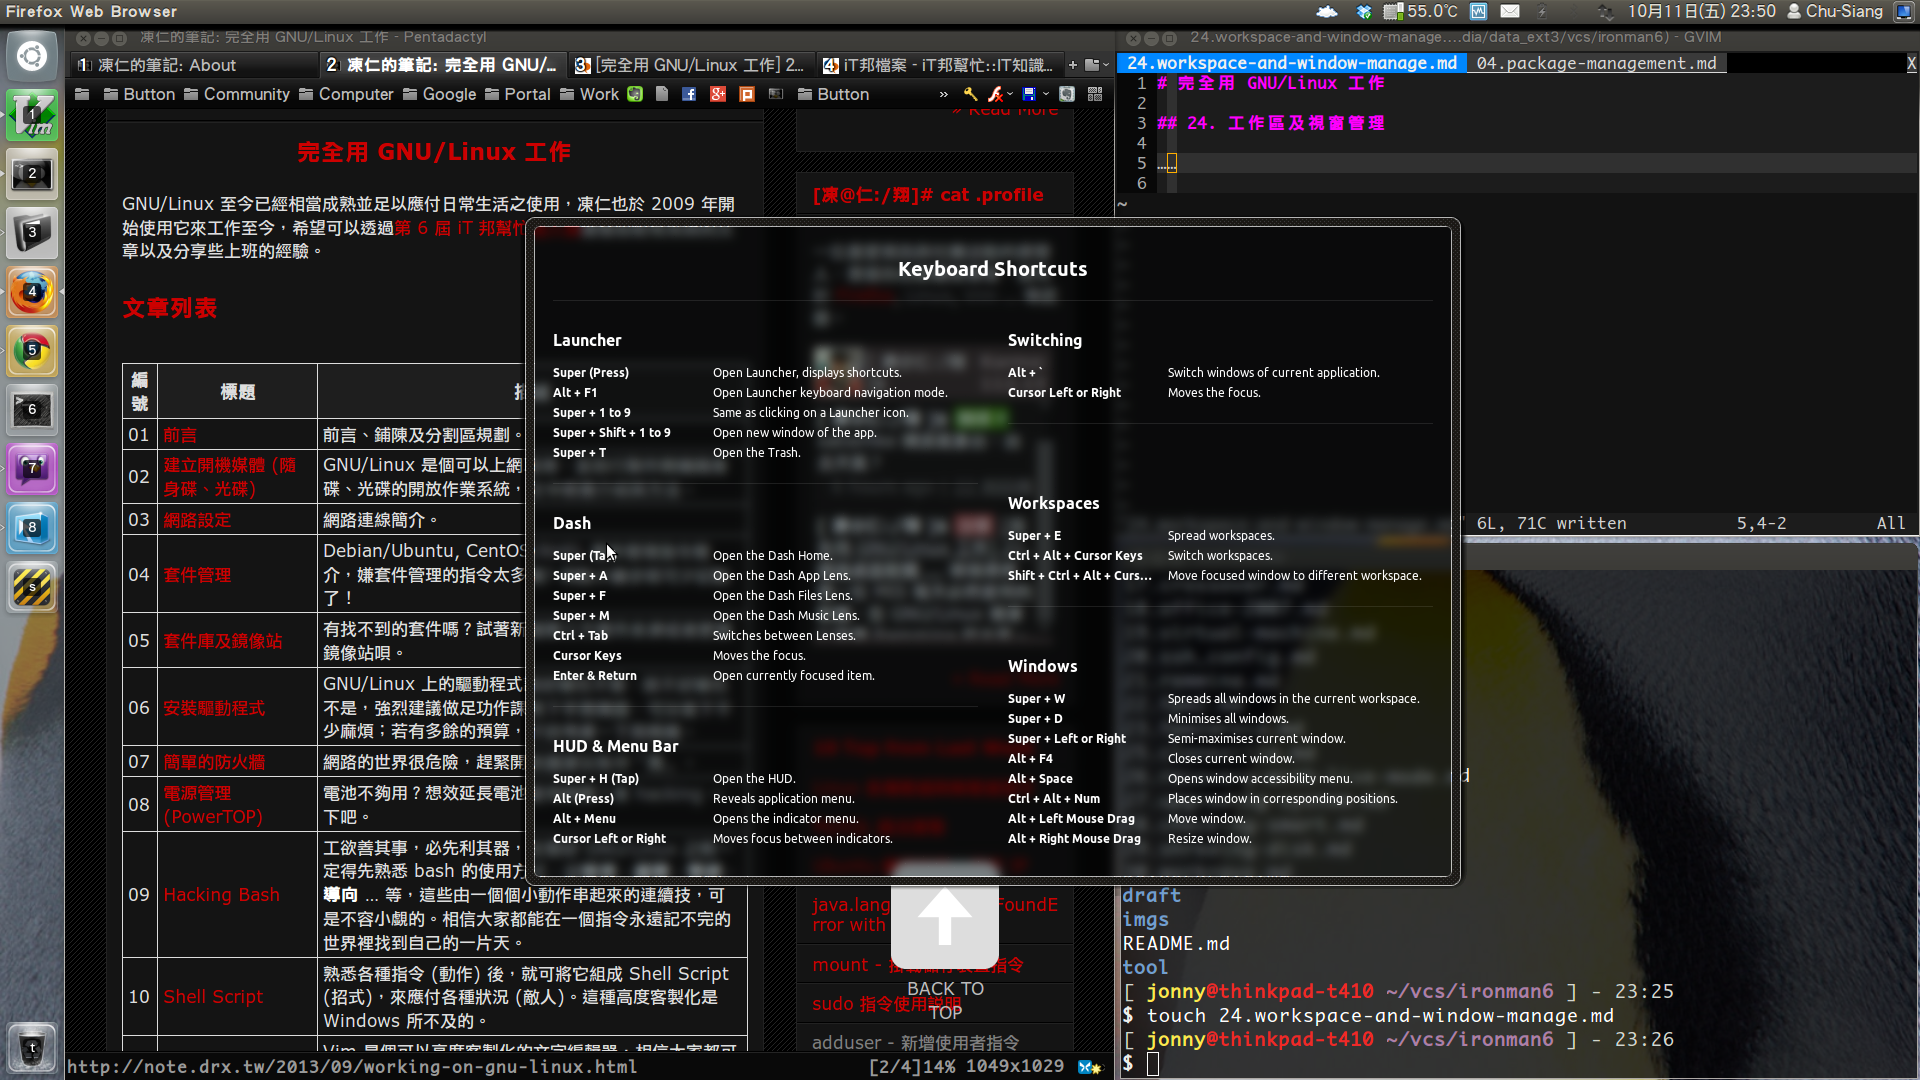 2013-10-11-workspace-and-window-manage-06.png